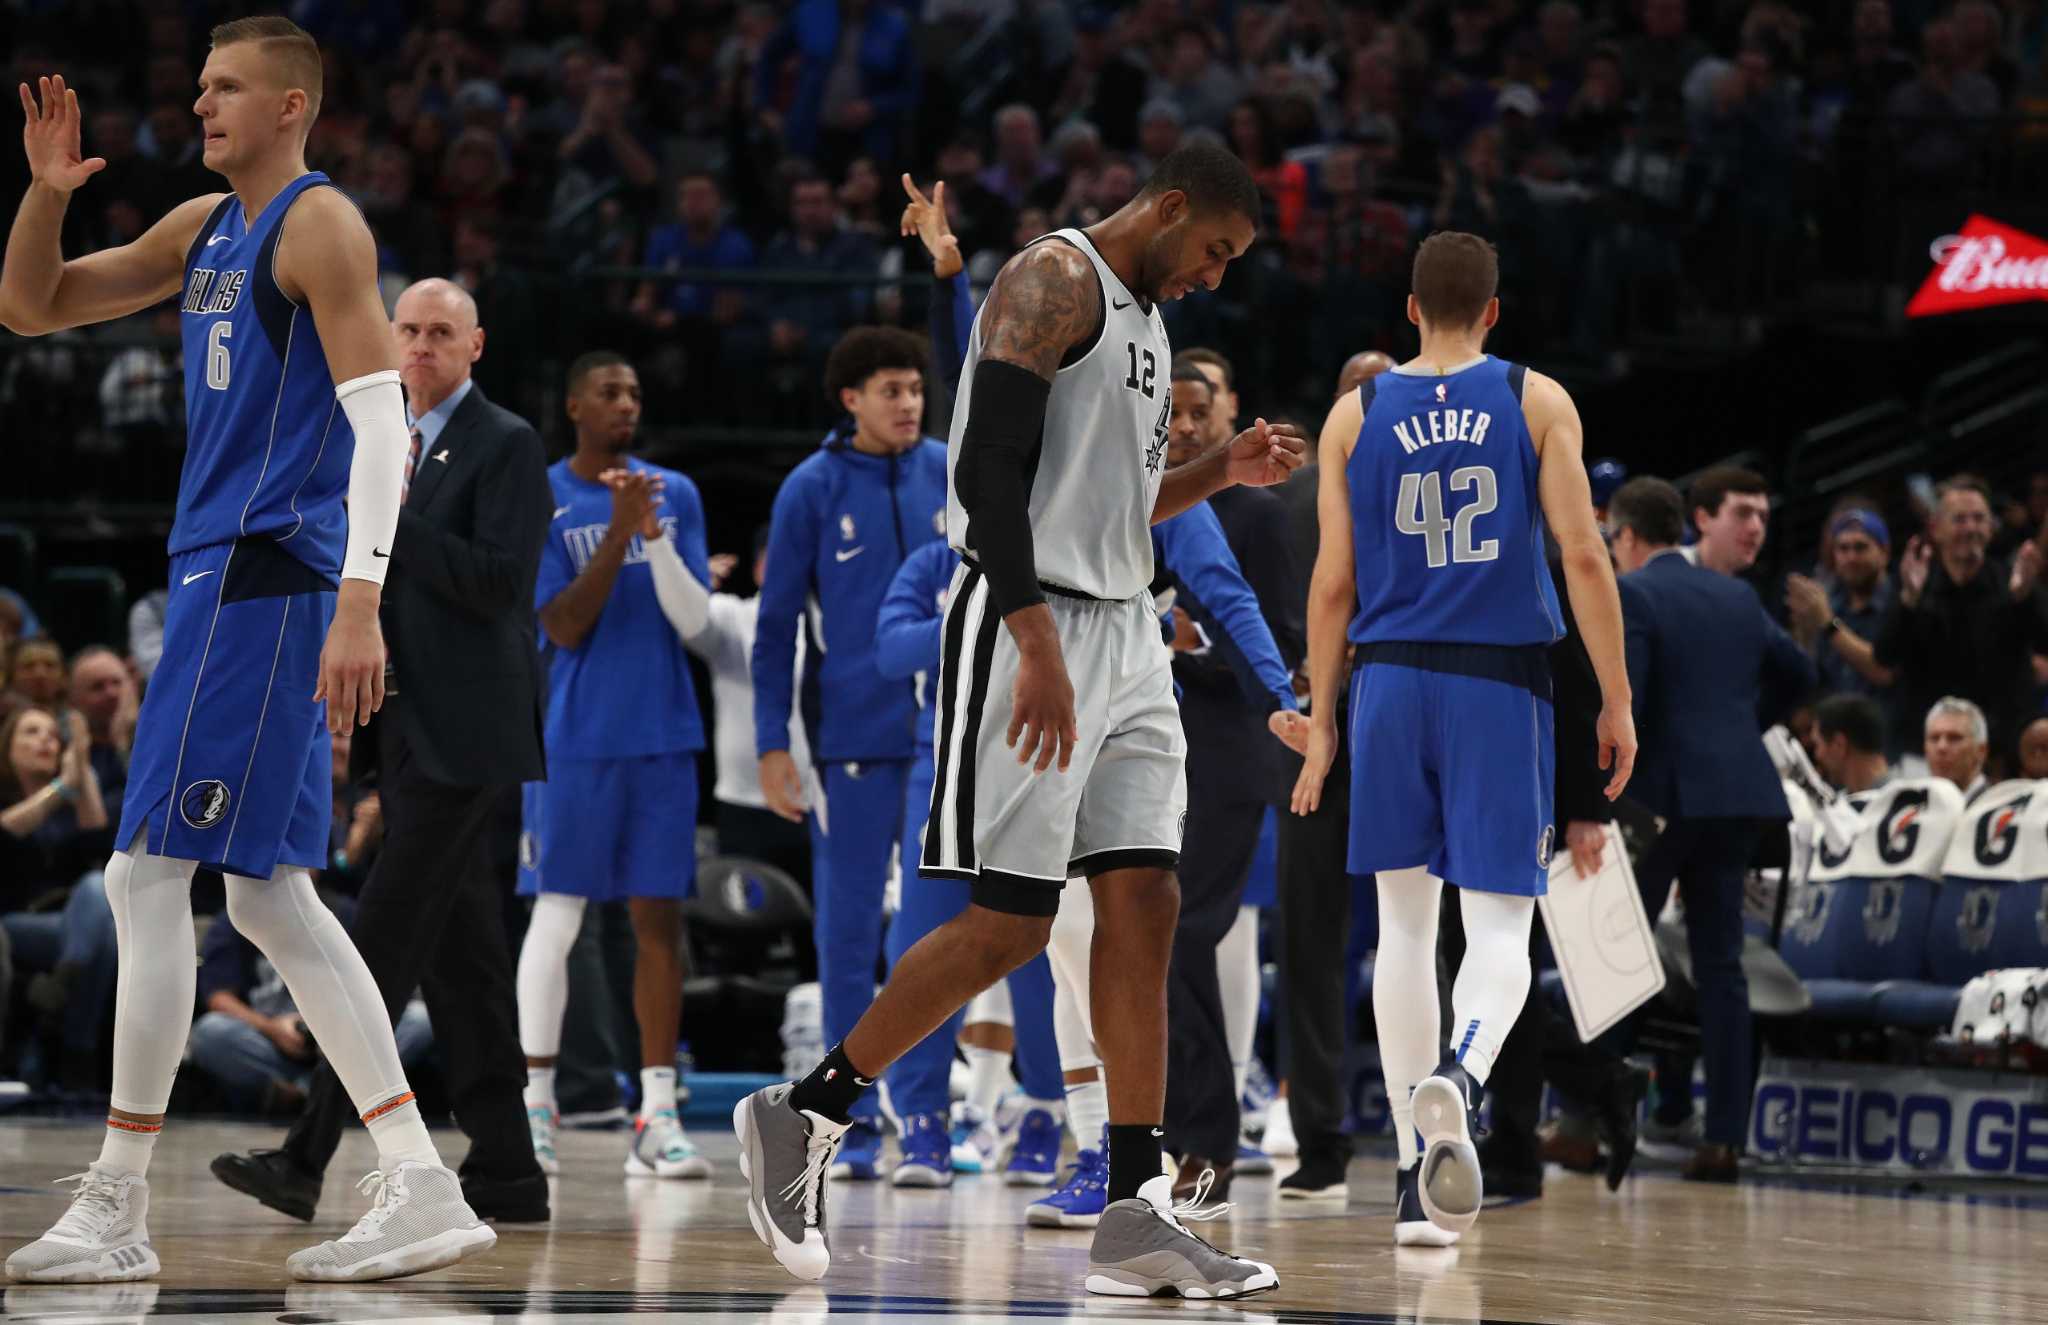 Mavs Luka Doncic Sends Spurs To Their Sixth Straight Loss